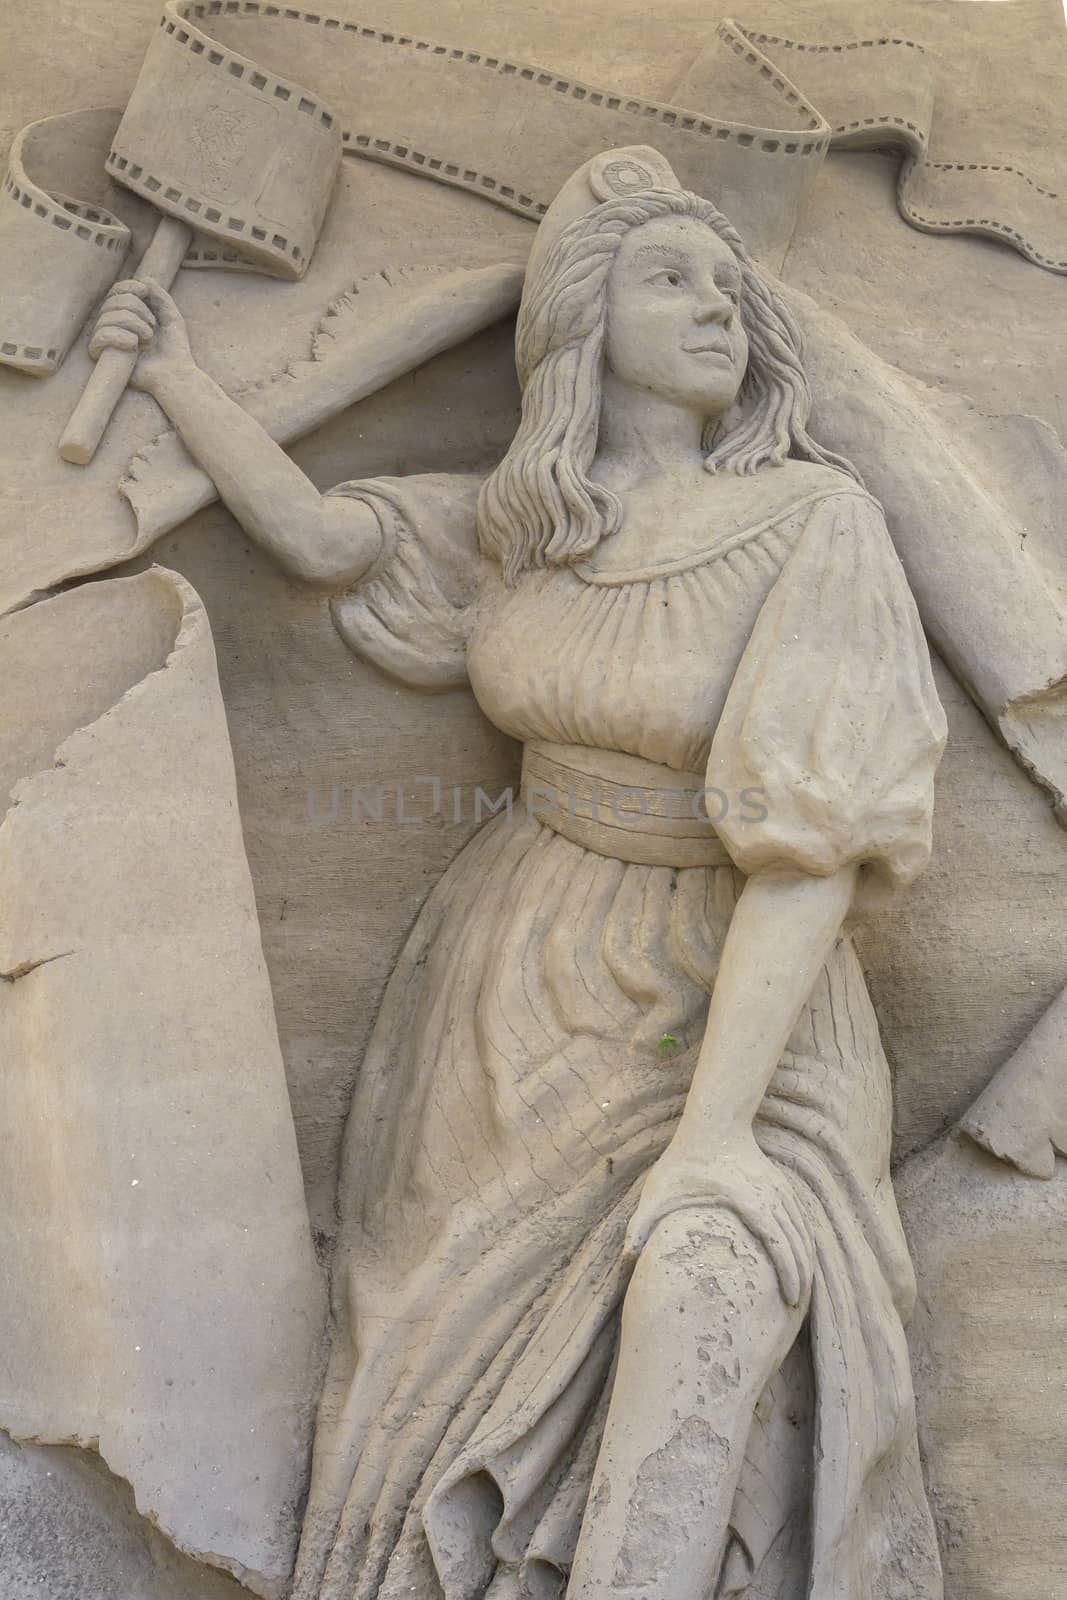 Sand sculpture of a woman. It can be used as background.